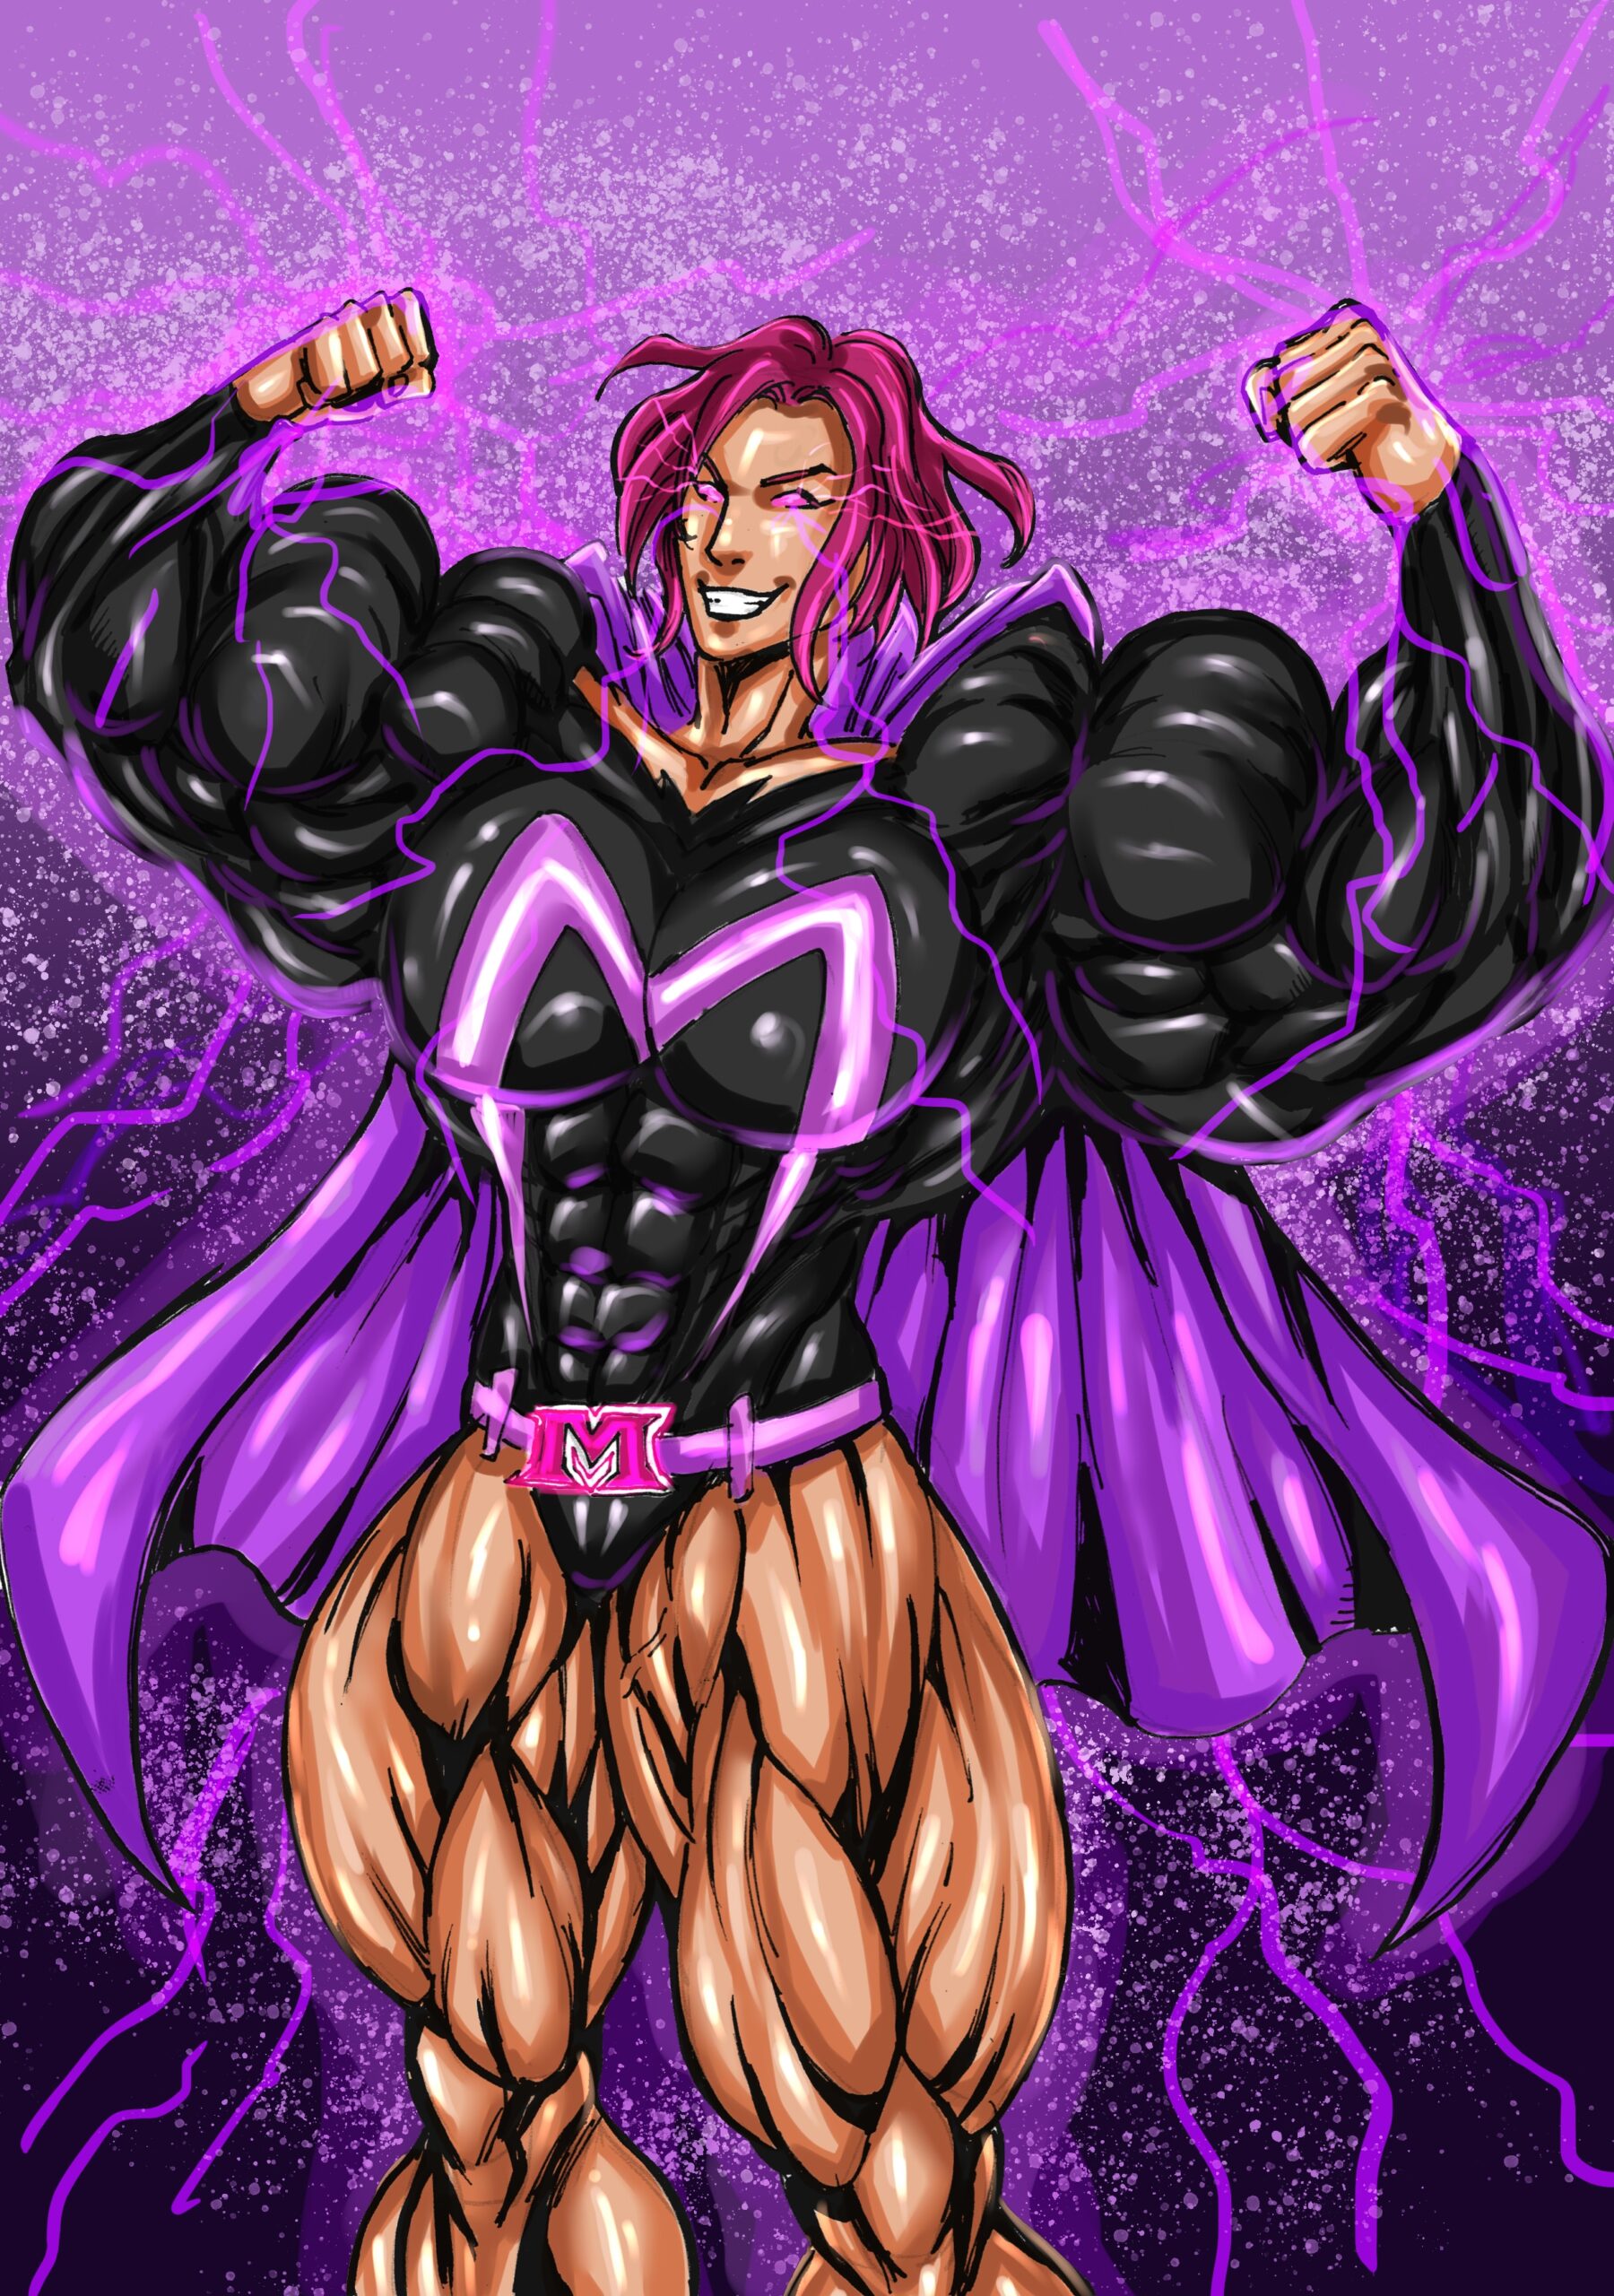 magna female muscle growth